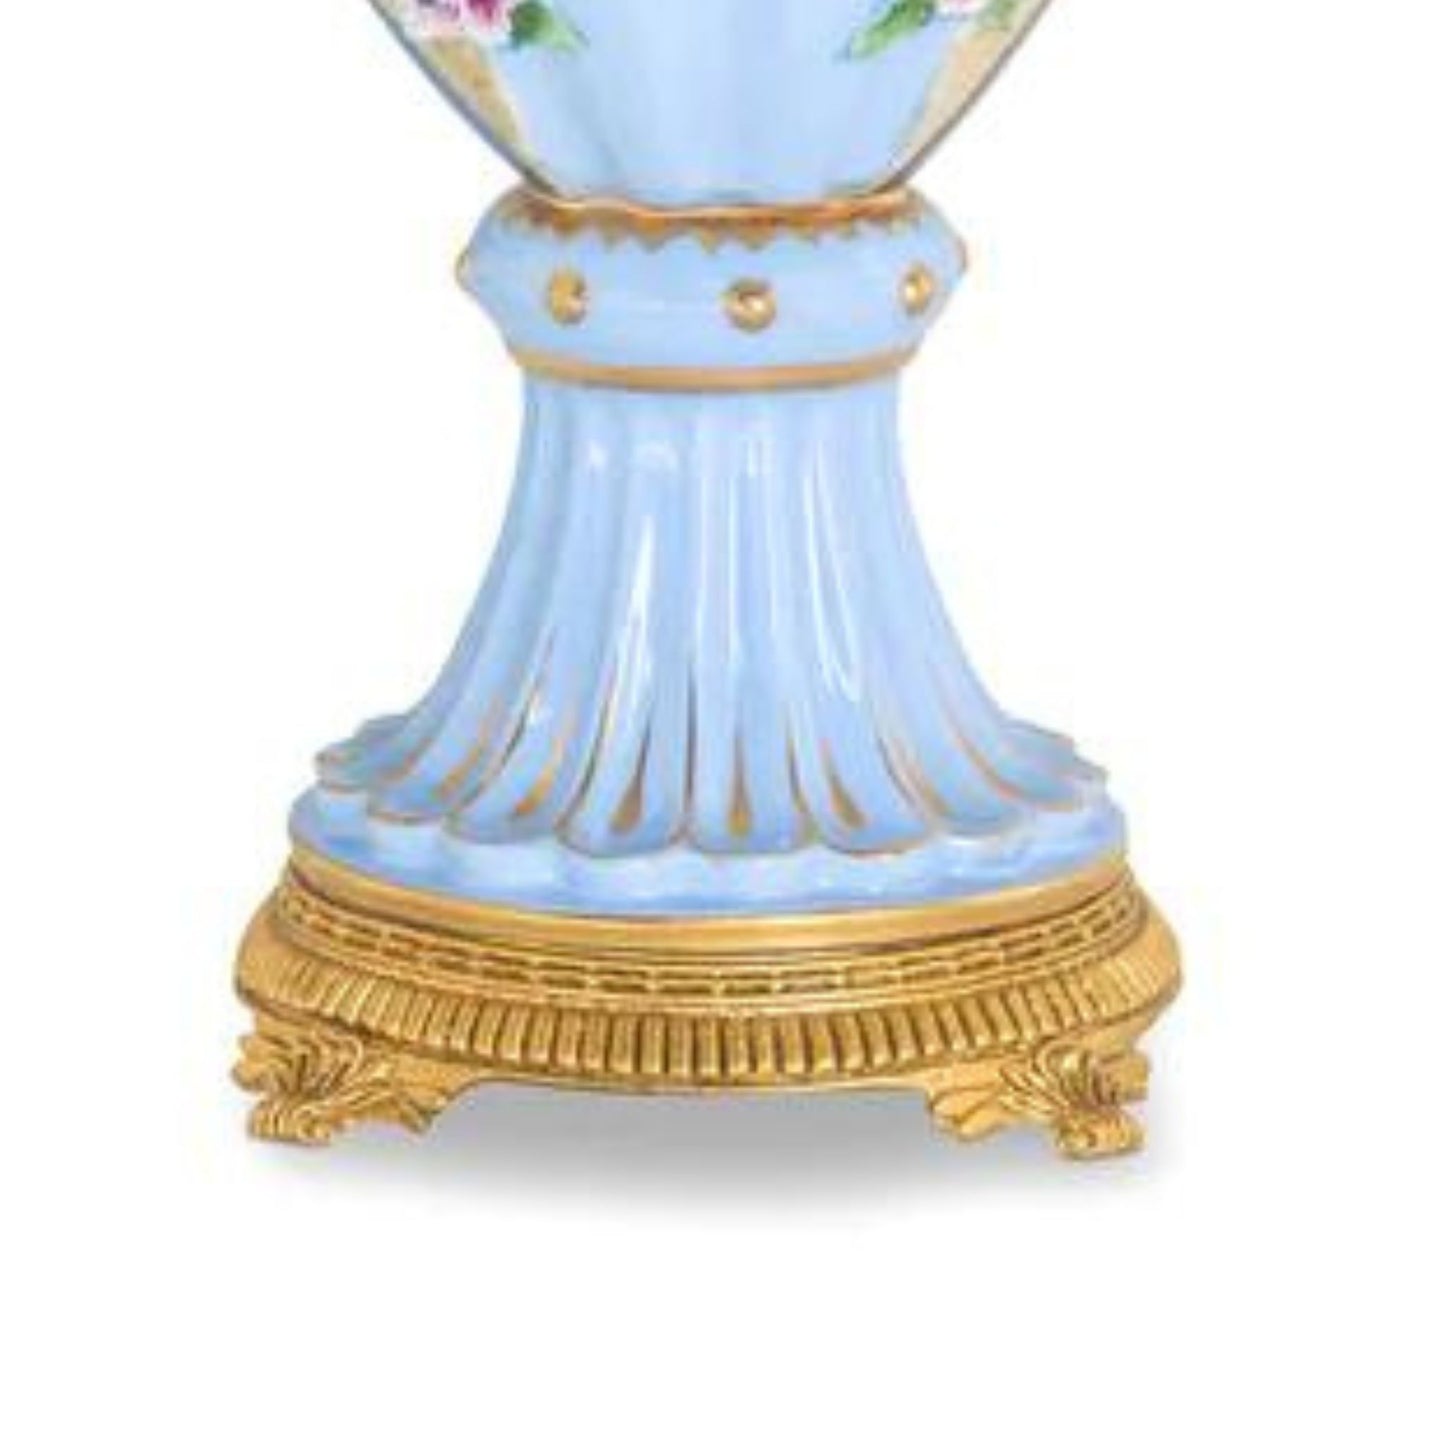 Baroque Hand-painted Motif Covered Jar